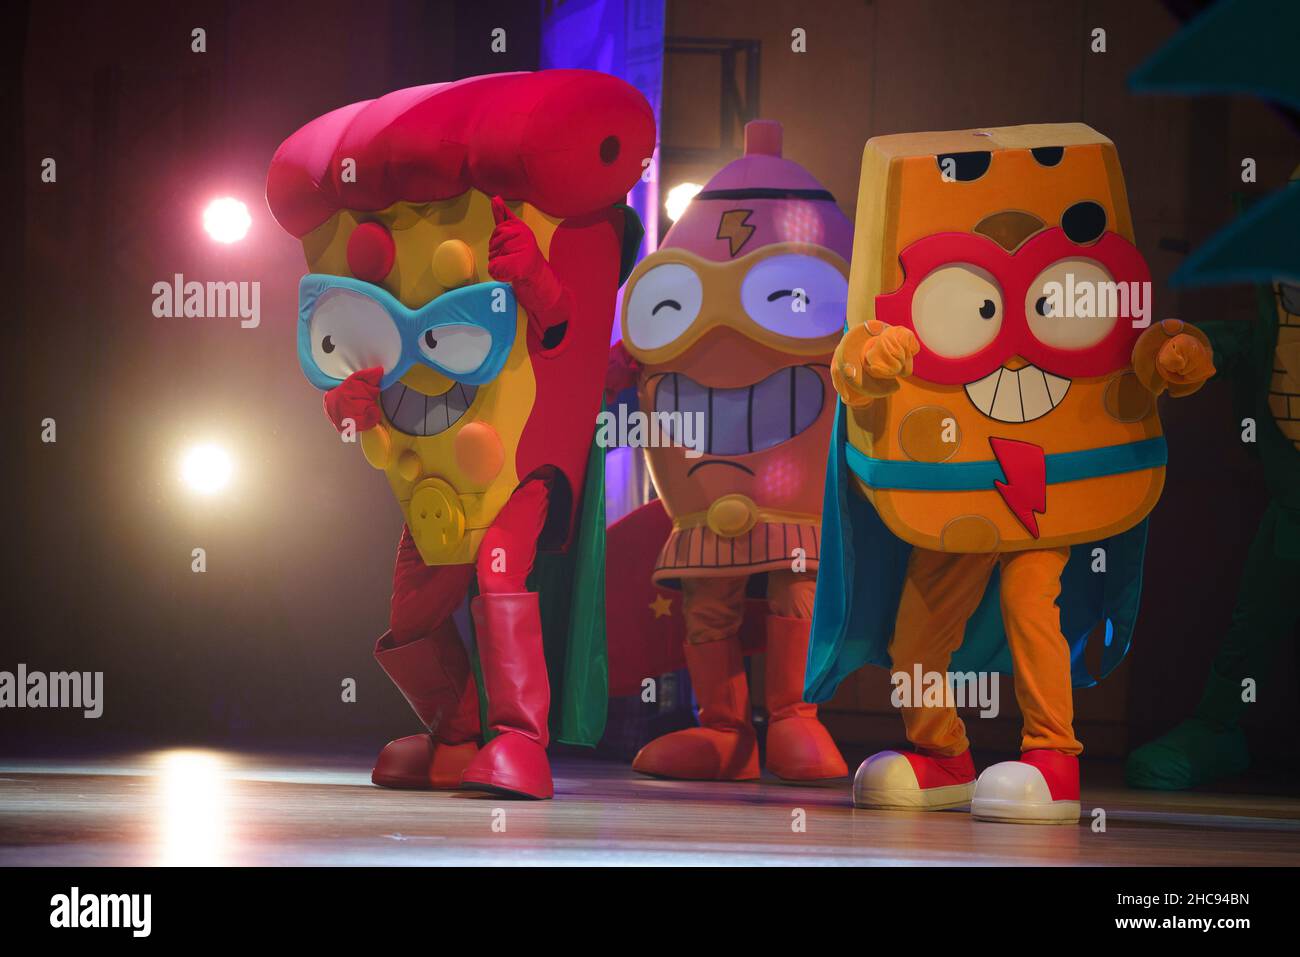 https://c8.alamy.com/comp/2HC94BN/madrid-spain-26th-dec-2021-superthings-characters-at-the-world-premiere-of-the-childrens-show-superthings-live!-at-the-ifema-municipal-palace-in-madrid-with-this-show-the-superthings-took-to-the-stage-for-the-first-time-to-perform-their-most-famous-songs-thanks-to-a-montage-with-music-and-visual-effects-photo-by-atilano-garciasopa-imagessipa-usa-credit-sipa-usaalamy-live-news-2HC94BN.jpg